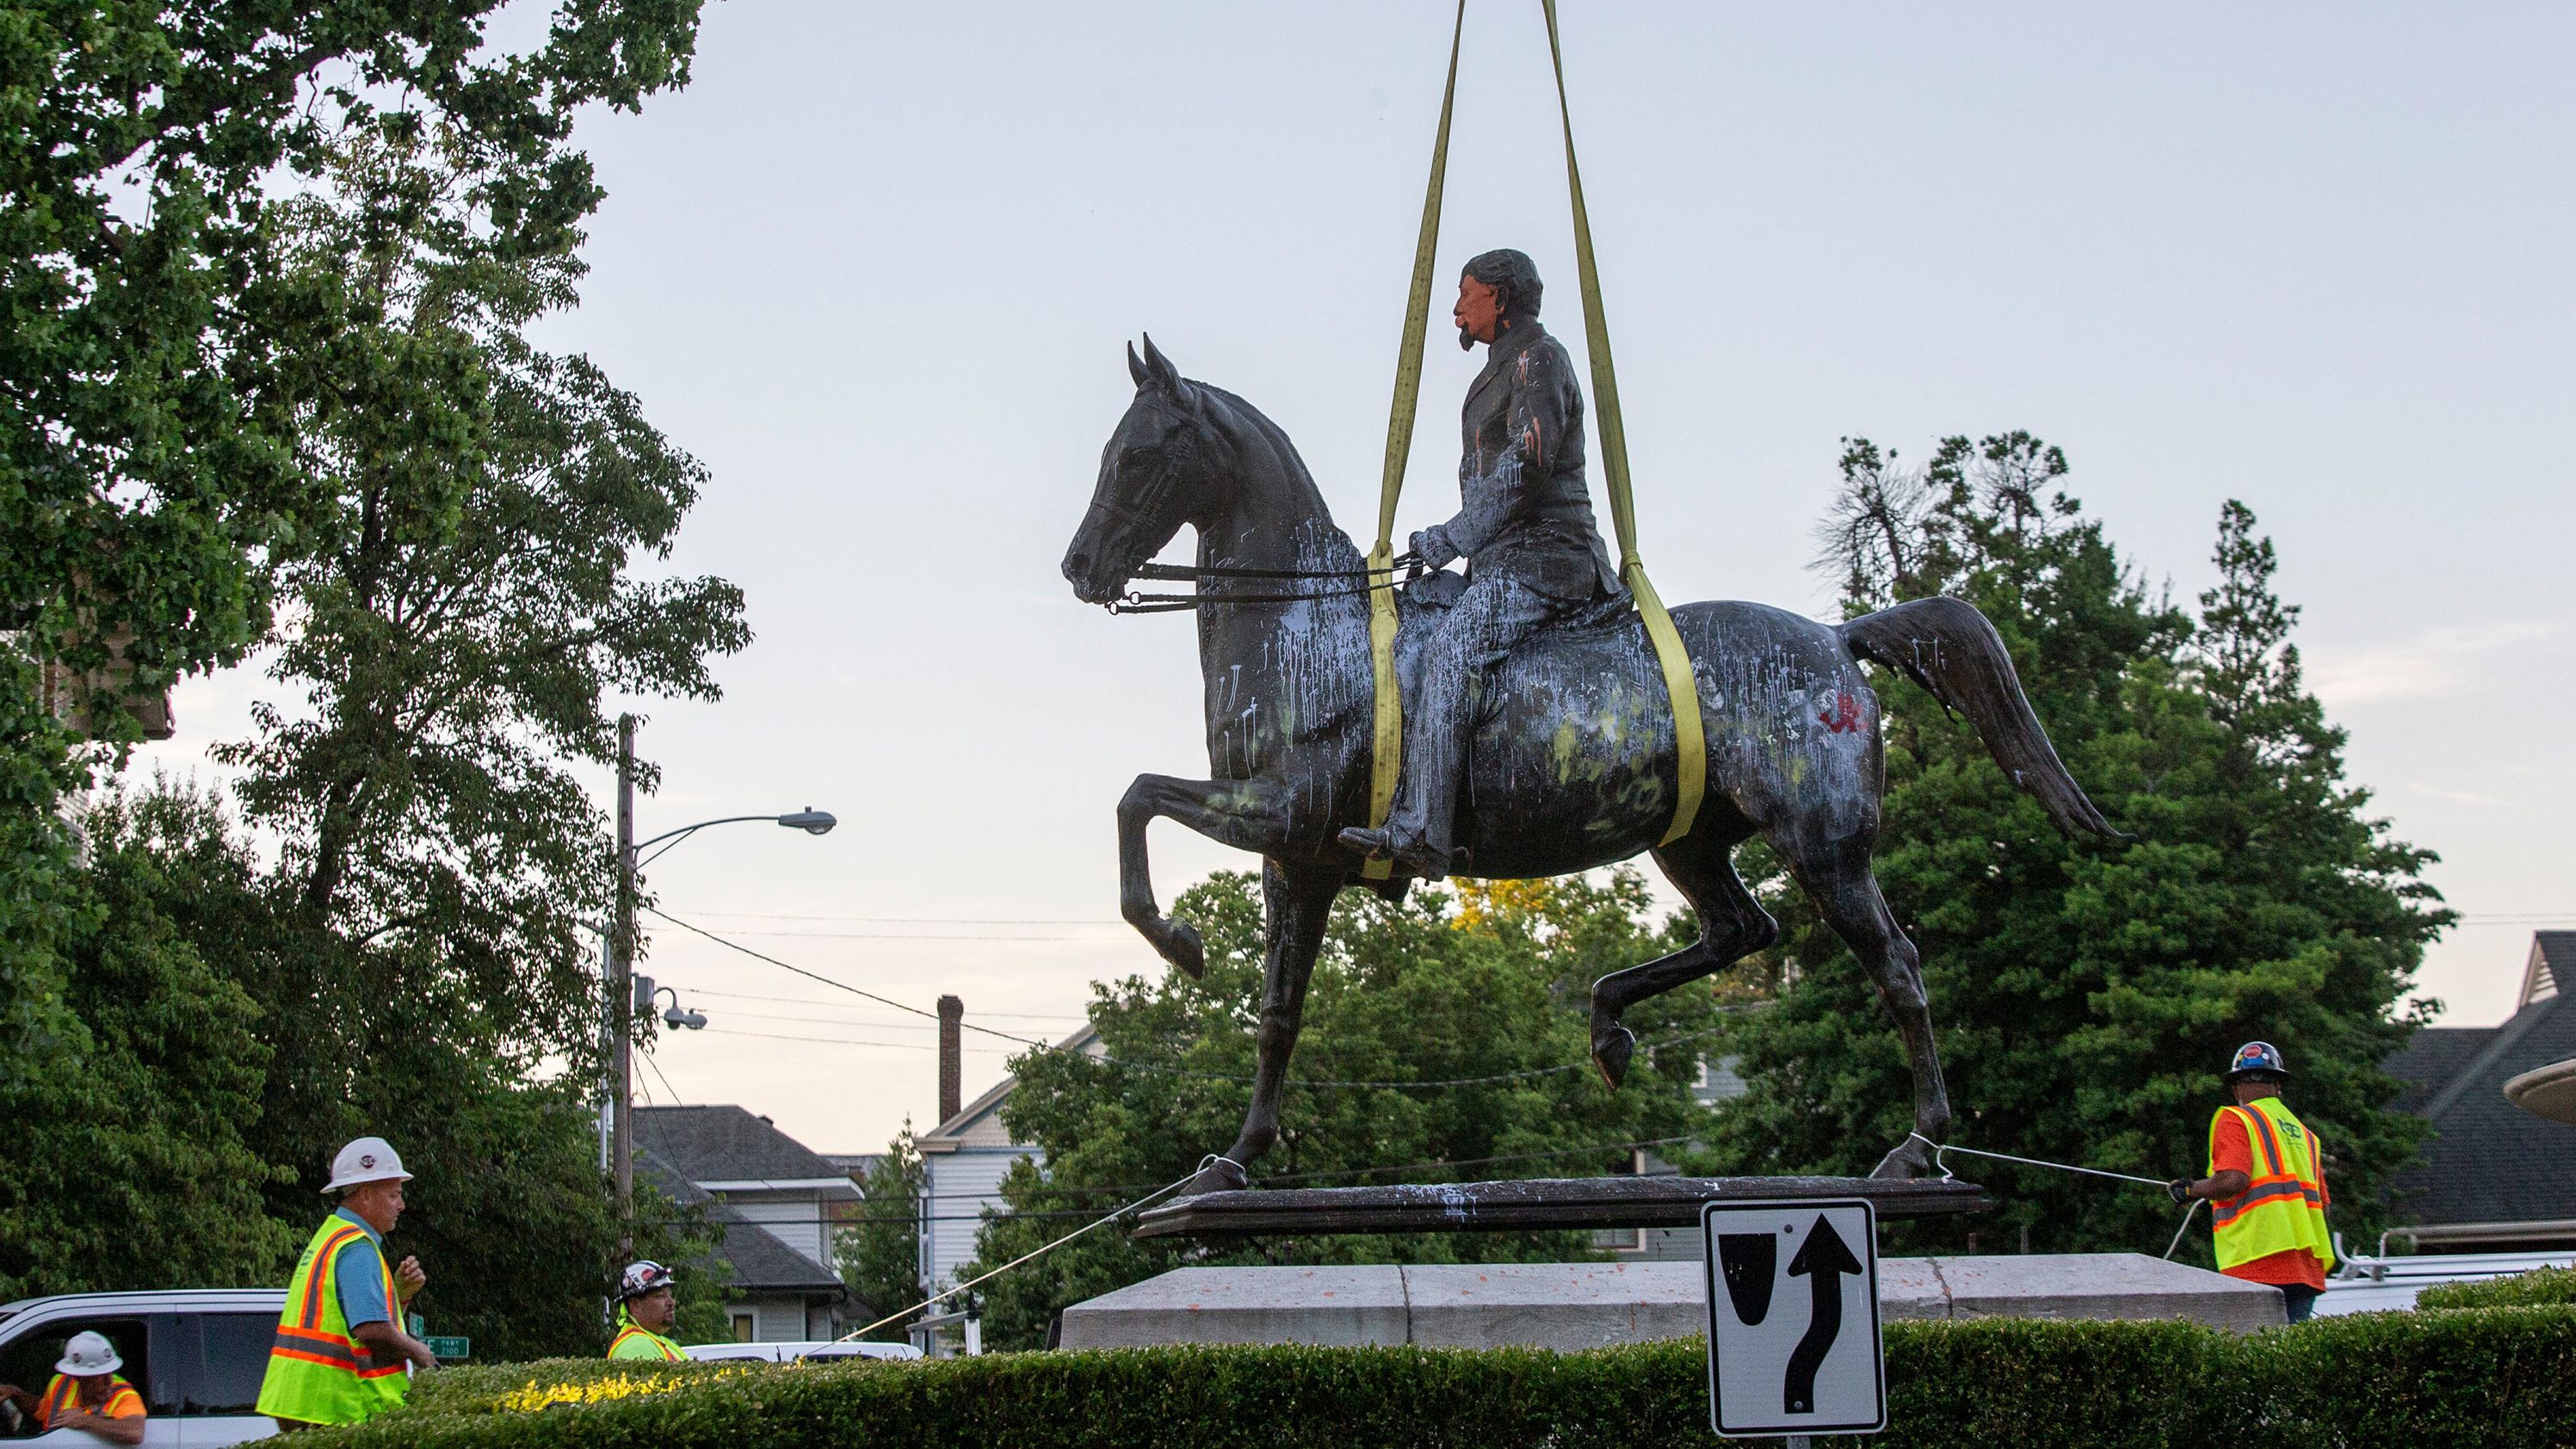 The John B. Castleman statue, in Louisville's Cherokee Triangle neighborhood, was removed from its pedestal where it stood for over 100 years. The statue to the controversial Castleman has been vandalized often over the last ten years. The statue is lifted off its base. June 8. 2020